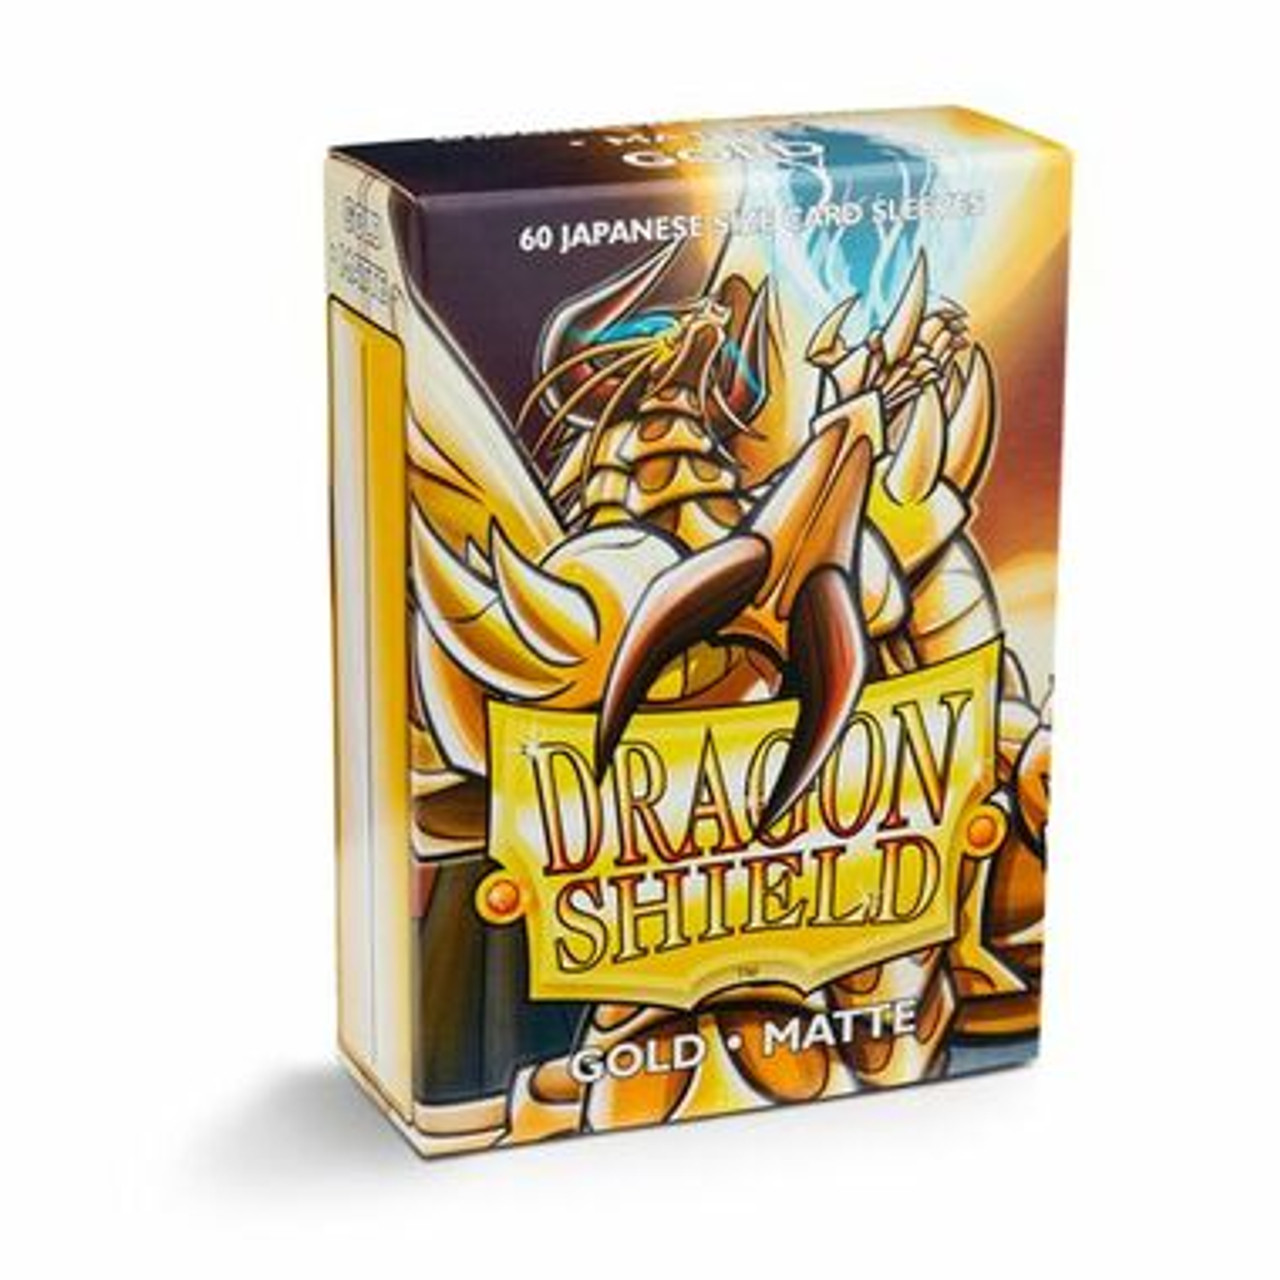 Dragon Shield Matte Gold Japanese Size Card Sleeves (60ct) - Game